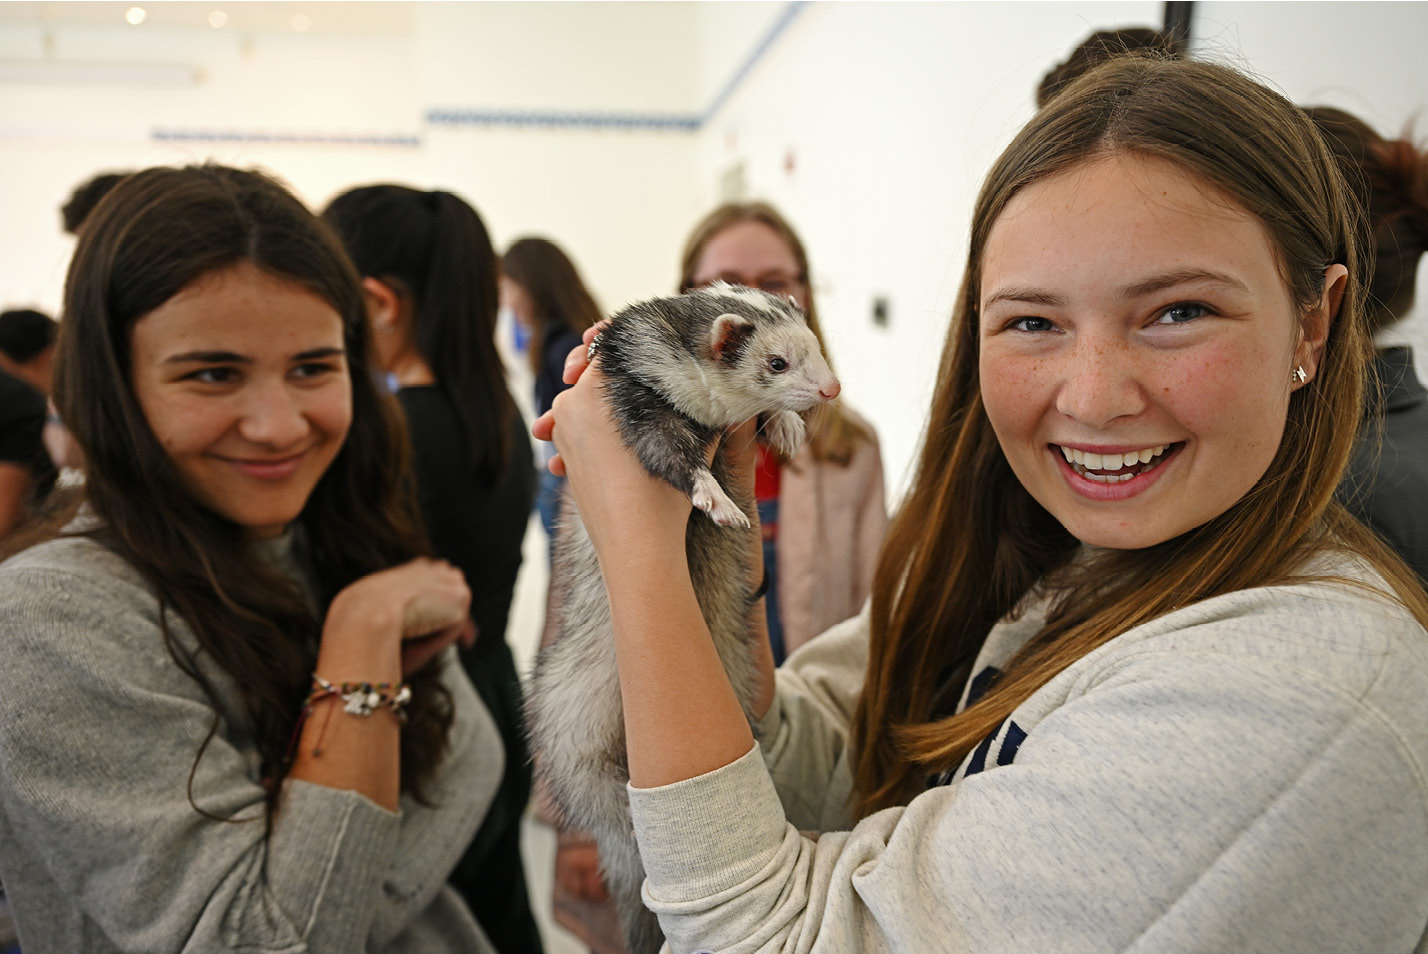 Students play with animals on campus to de-stress at a petting zoo from Warm and Fuzzy Animal Adventures Wednesday, April 19, 202